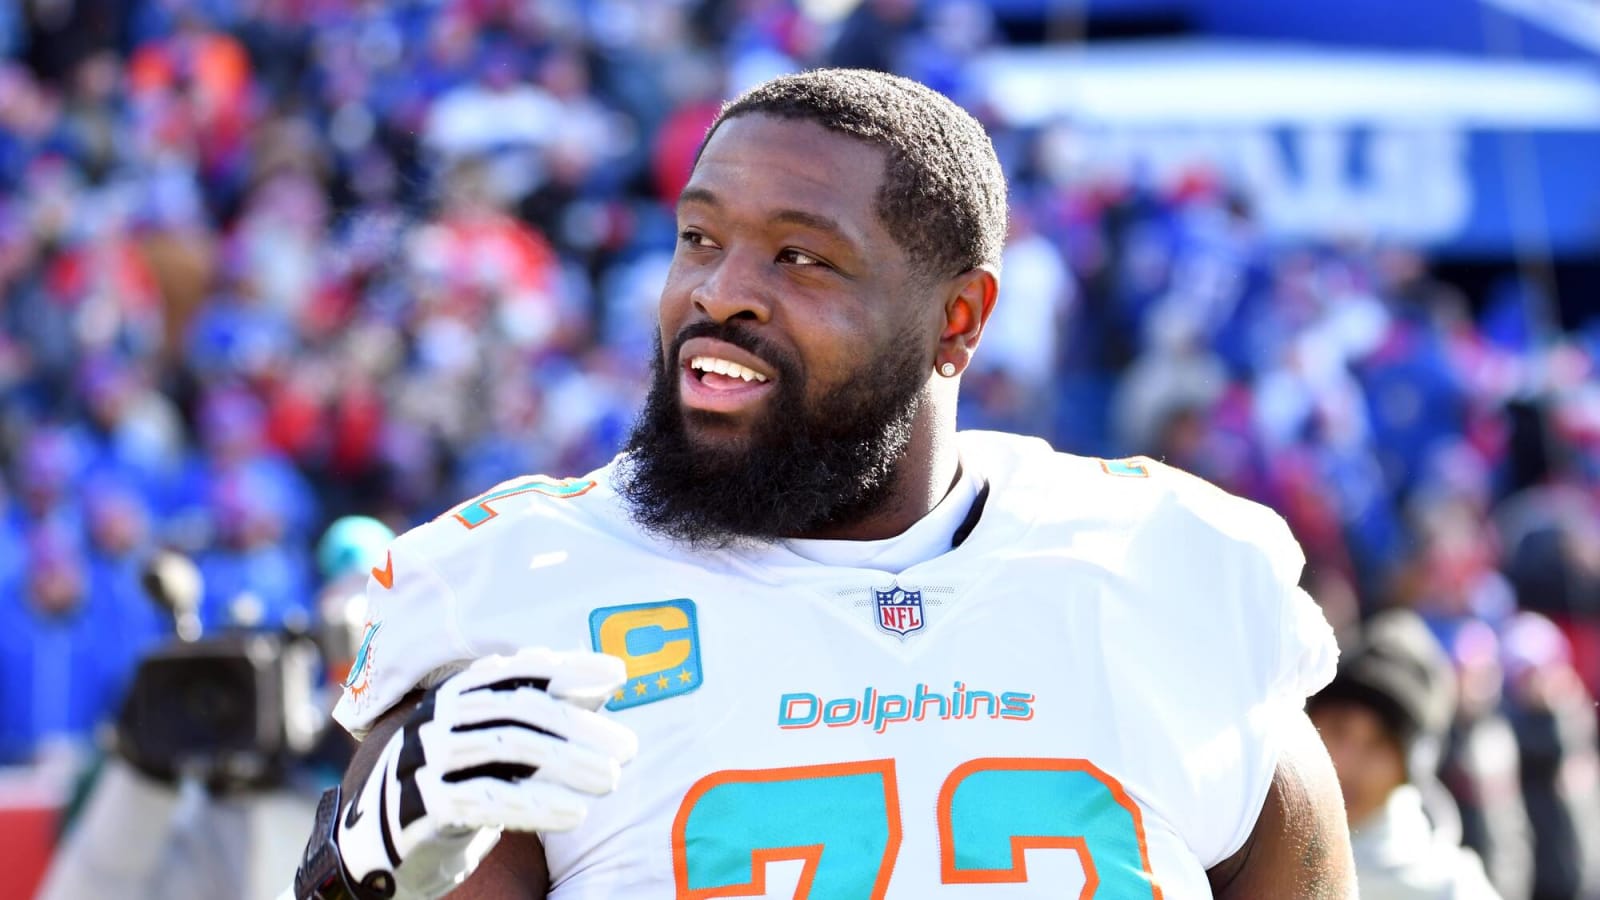 Report sheds light on future of Dolphins star LT